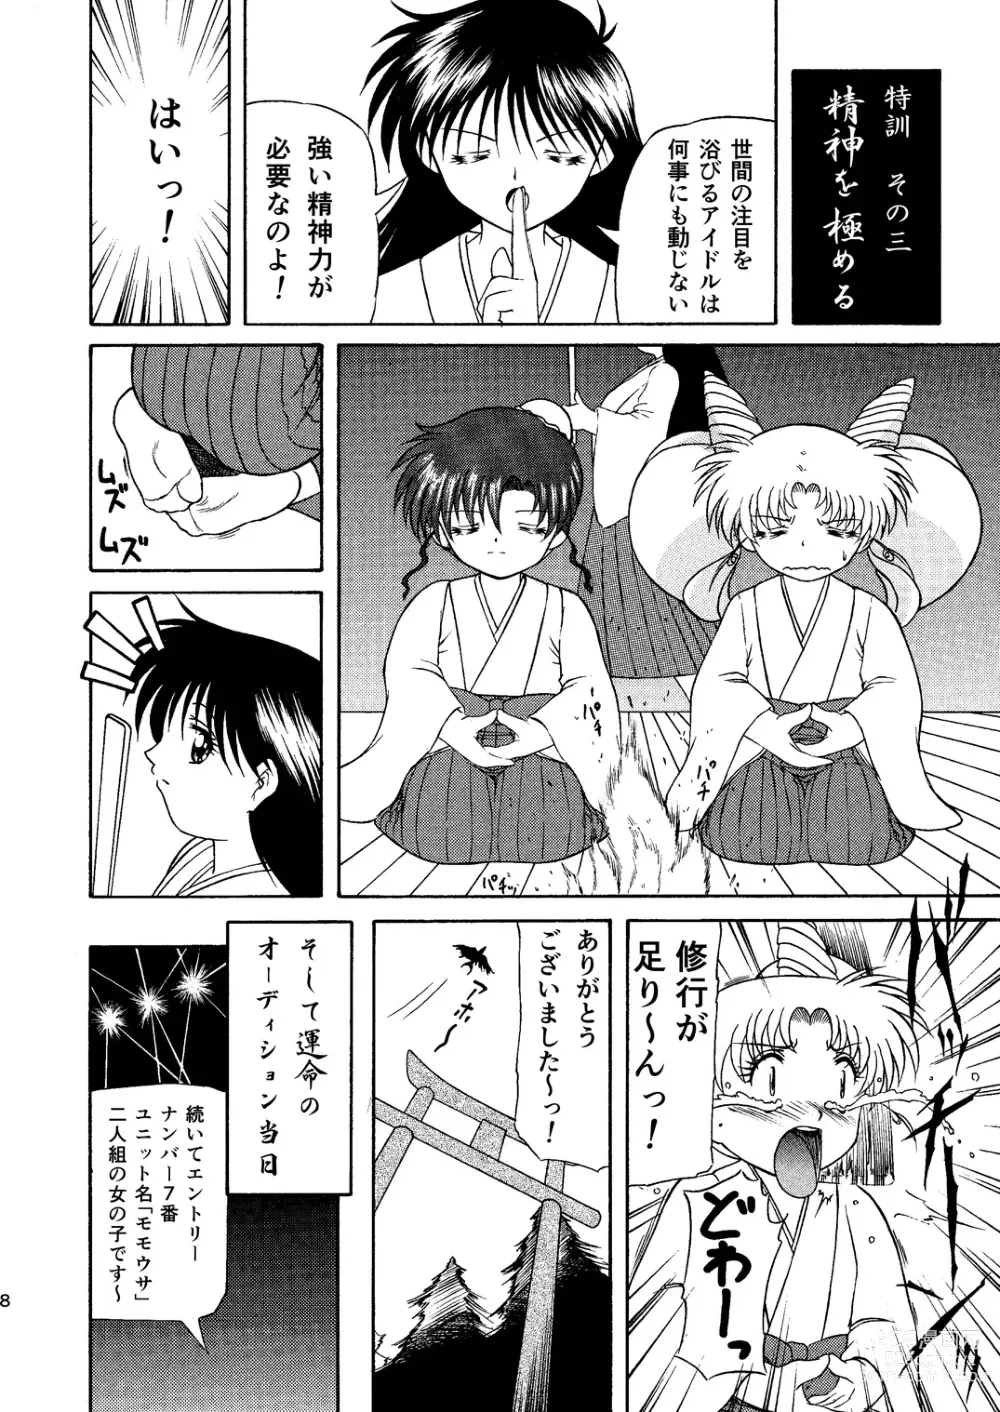 Page 8 of doujinshi PINK SUGAR 20th Anniversary Special